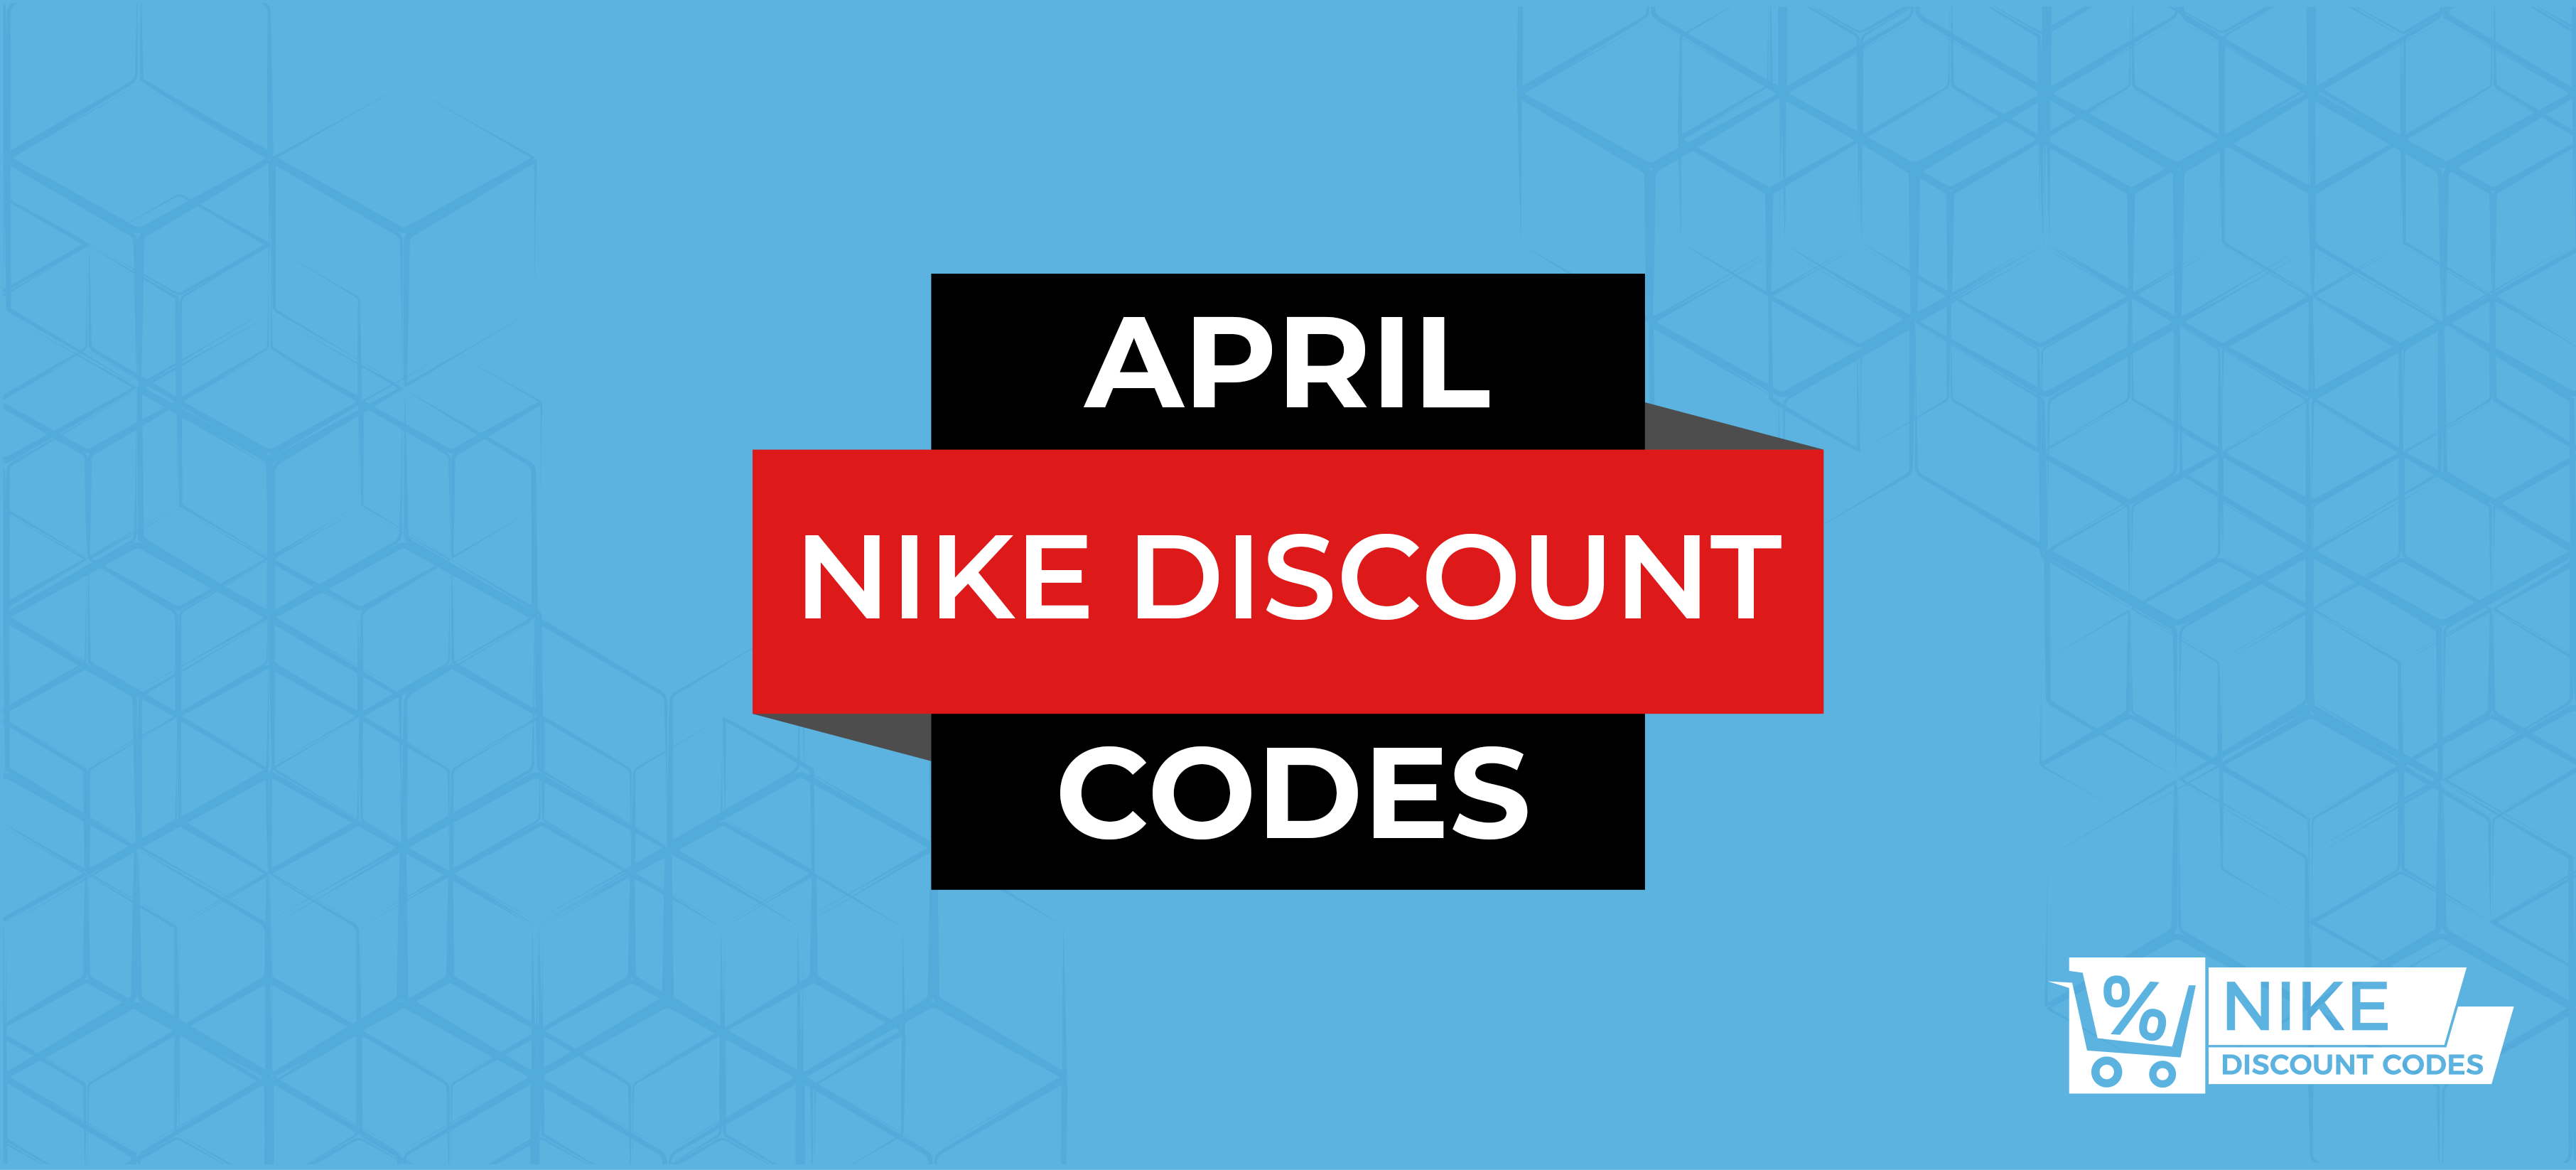 Nike Discount Code for April 2020 Nike Discount Codes